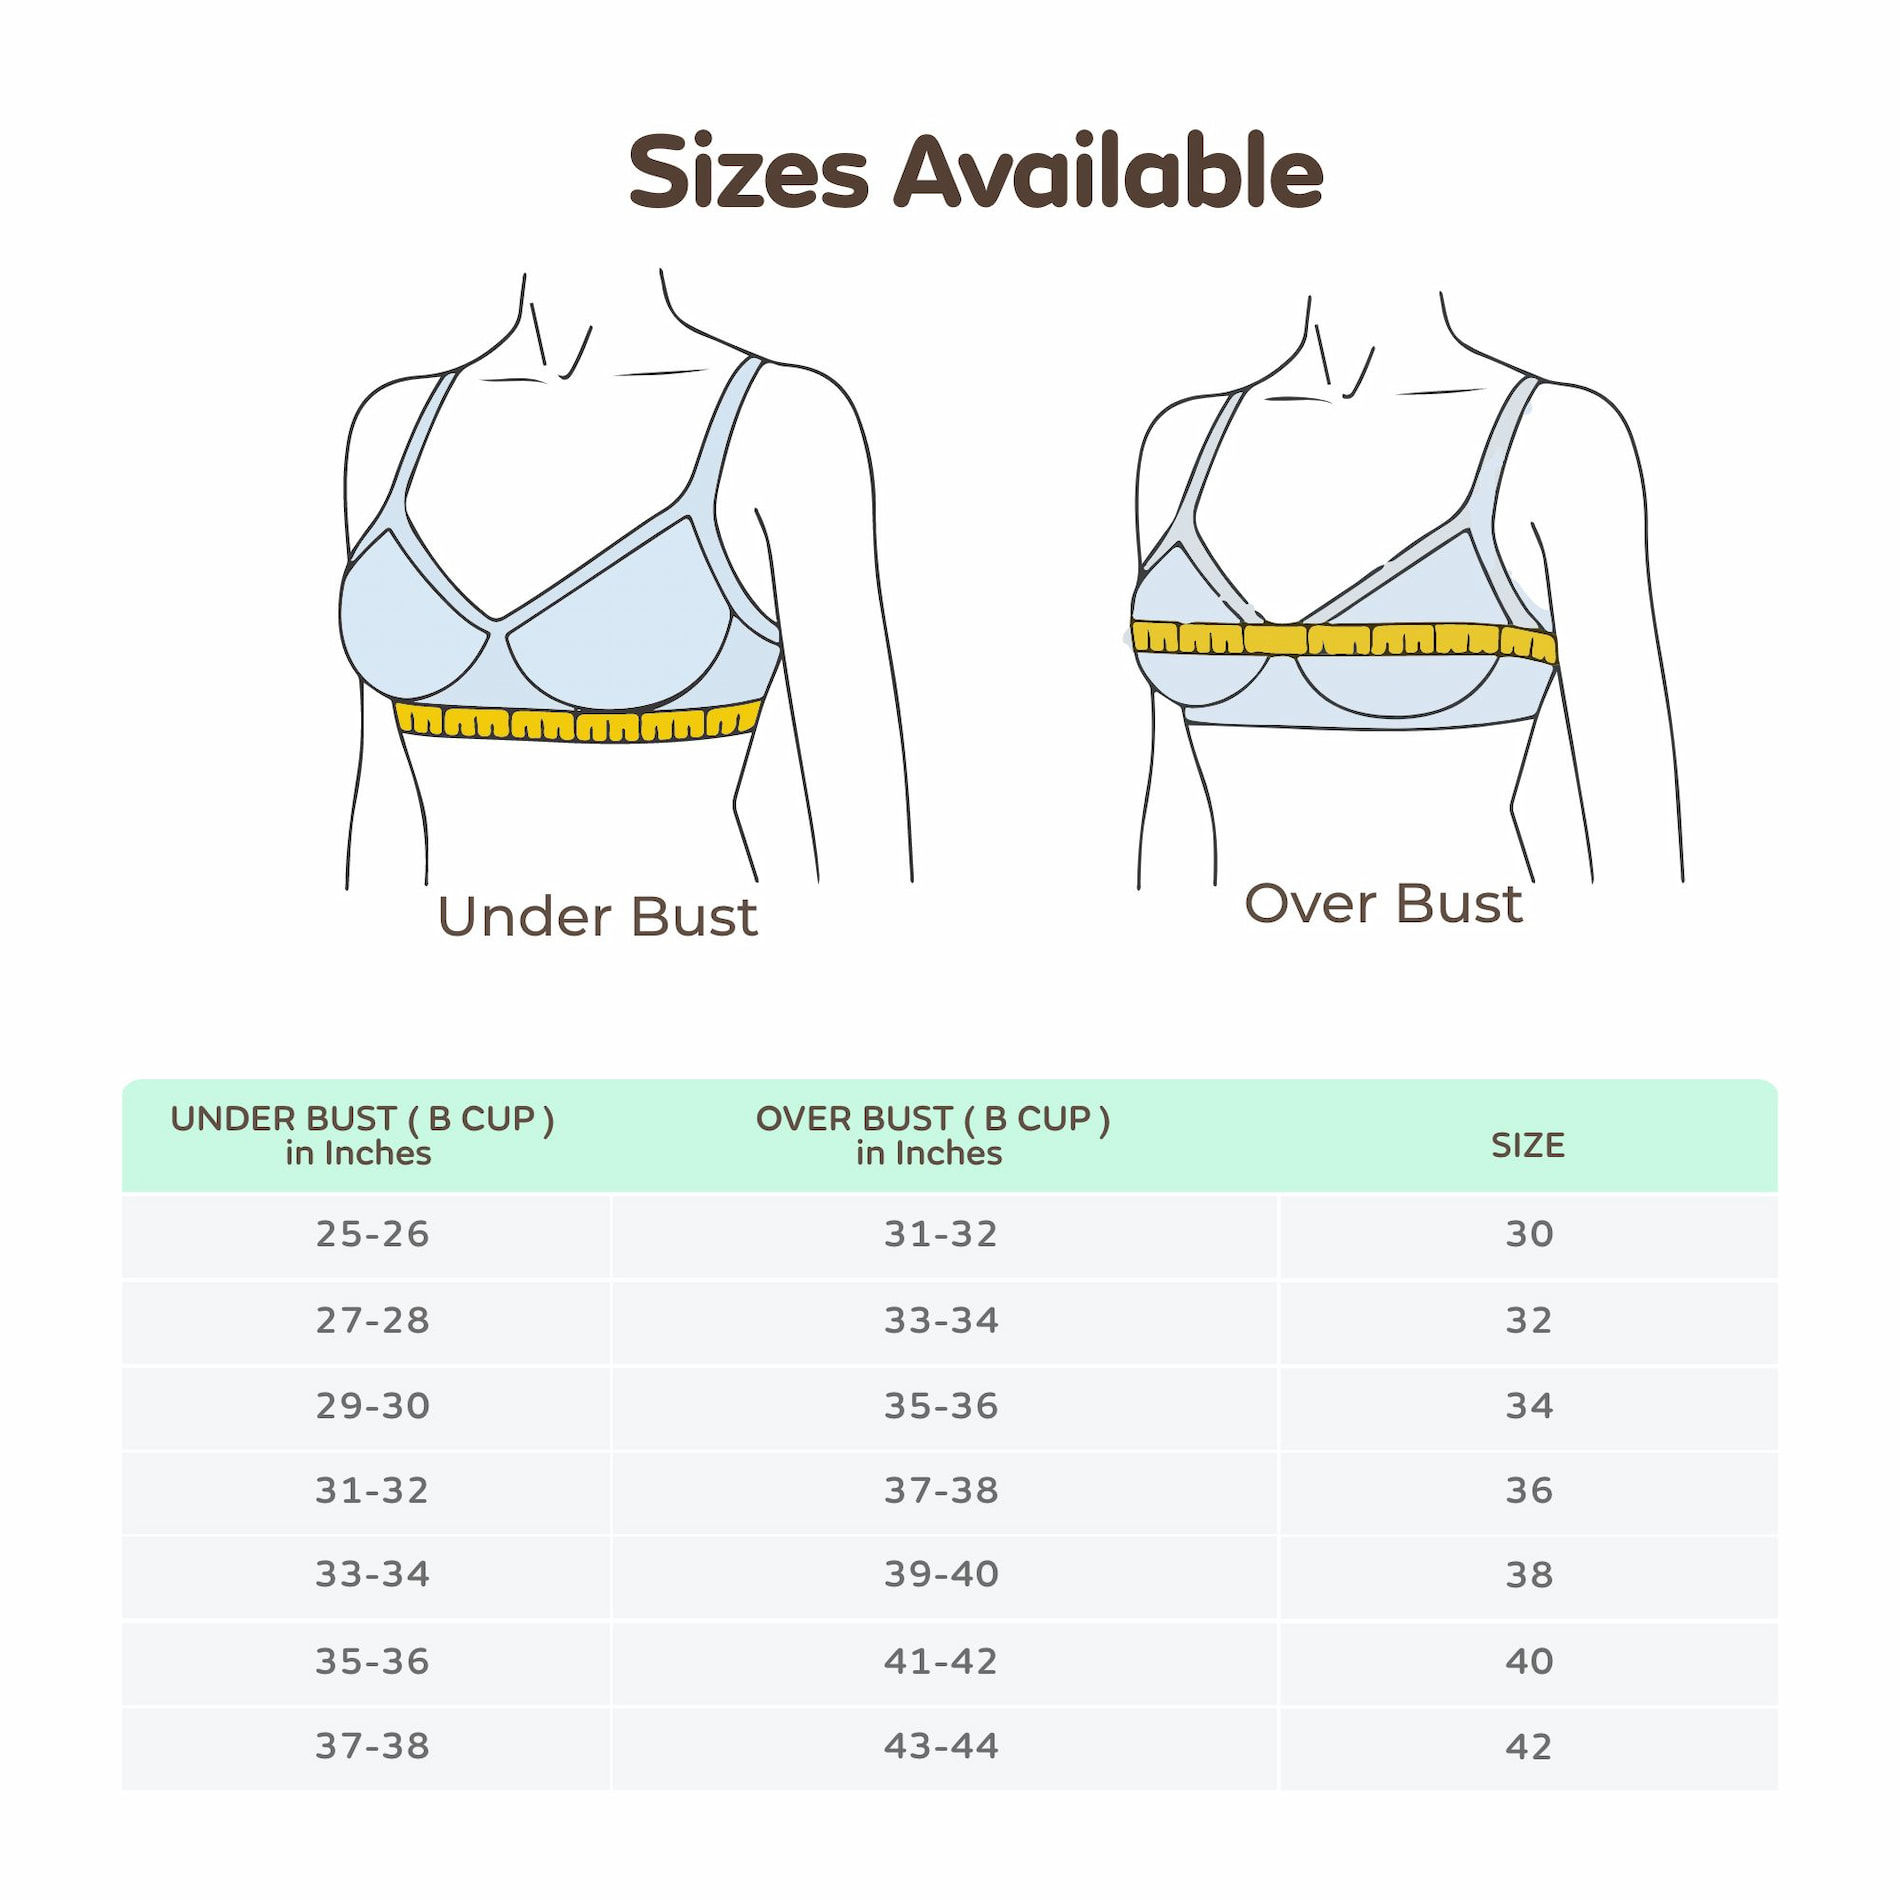 Maternity/Nursing Bras Non-Wired, Non-Padded - Pack of 3 with free Bra Extender (Classic Black, Classic White, Magnolia Cream) 30 B